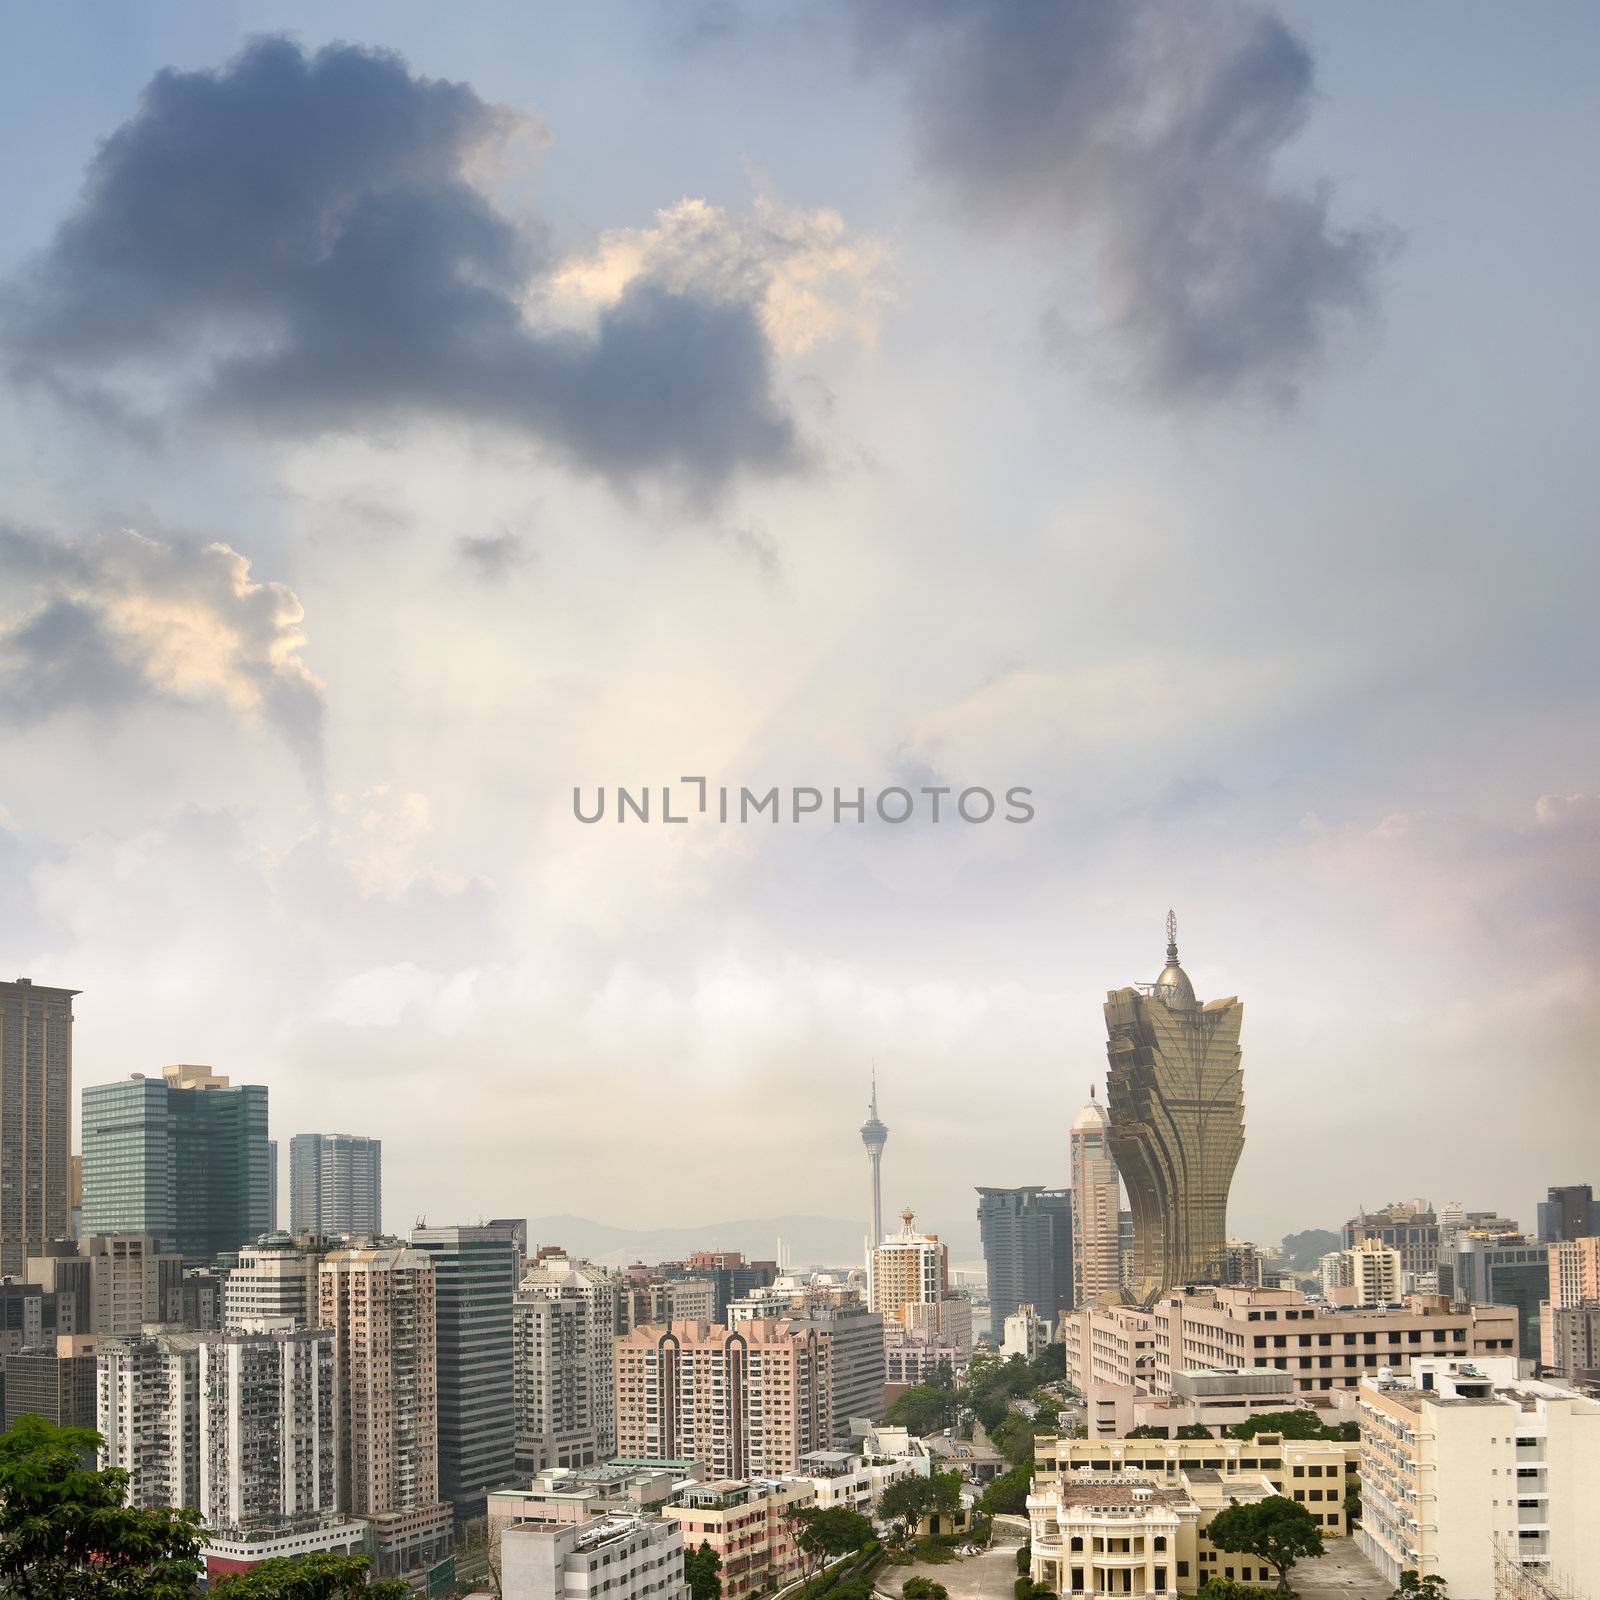 City skyline of Macau in afternoon in Macao, Asia.